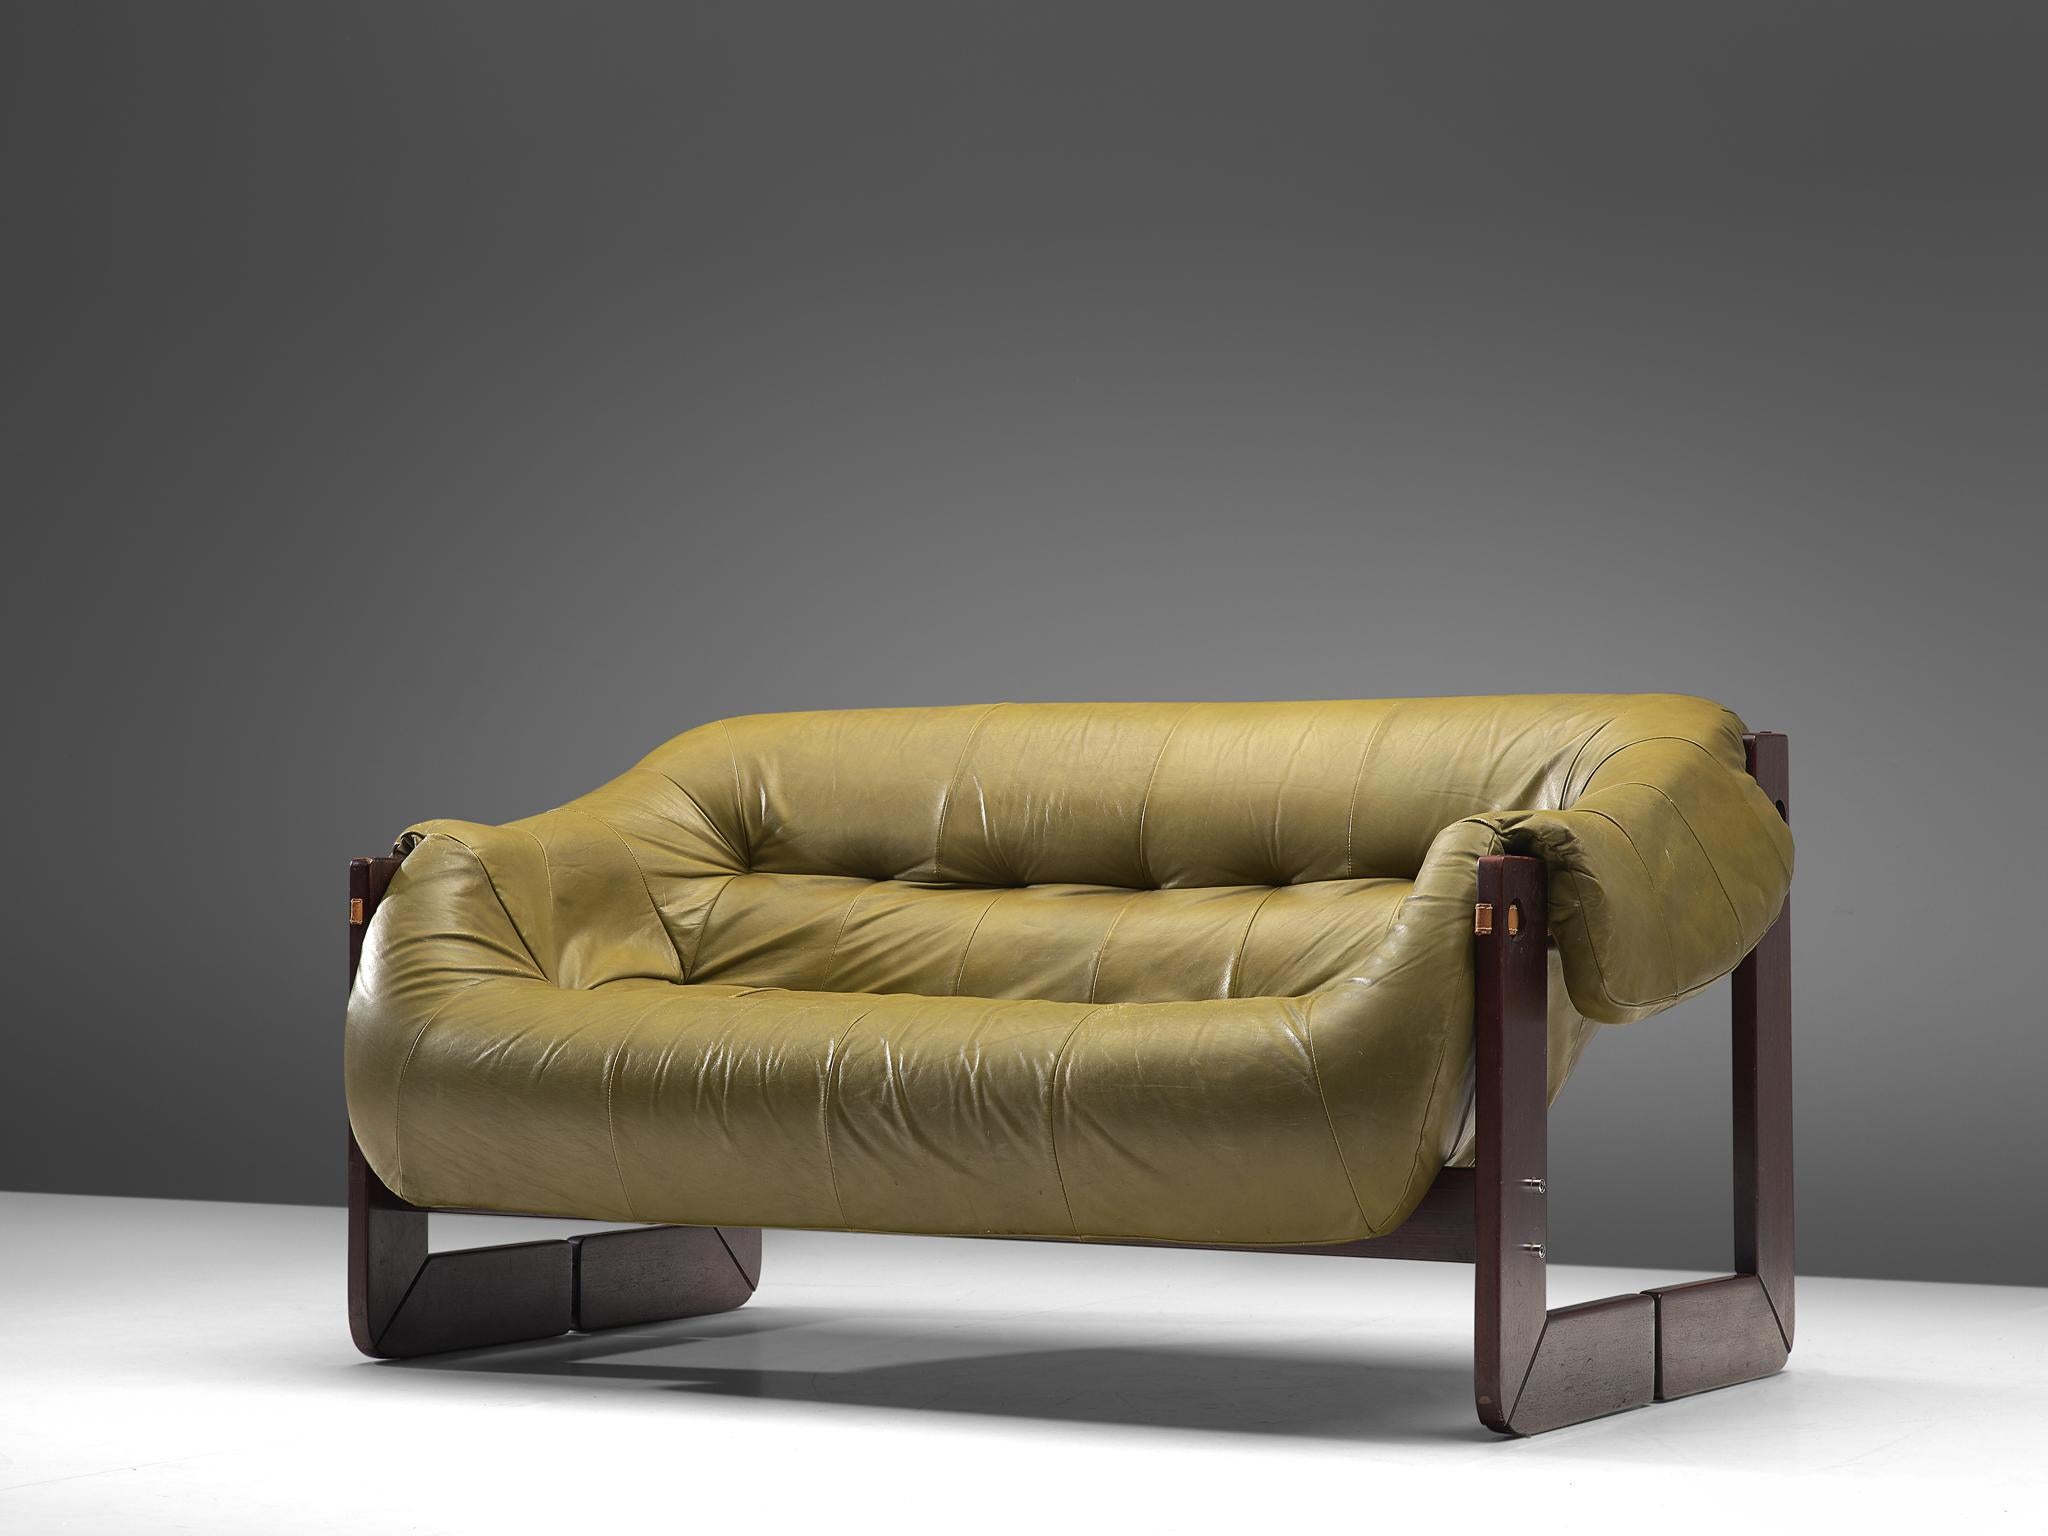 Percival Lafer, settee, leather, Brazilian hardwood and metal, Brazil, late 1960s

Bulky and voluptuous sofa by Brazilian designer Percival Lafer. This two-seat sofa features a solid dark wooden base with leather straps spanned between the slats.